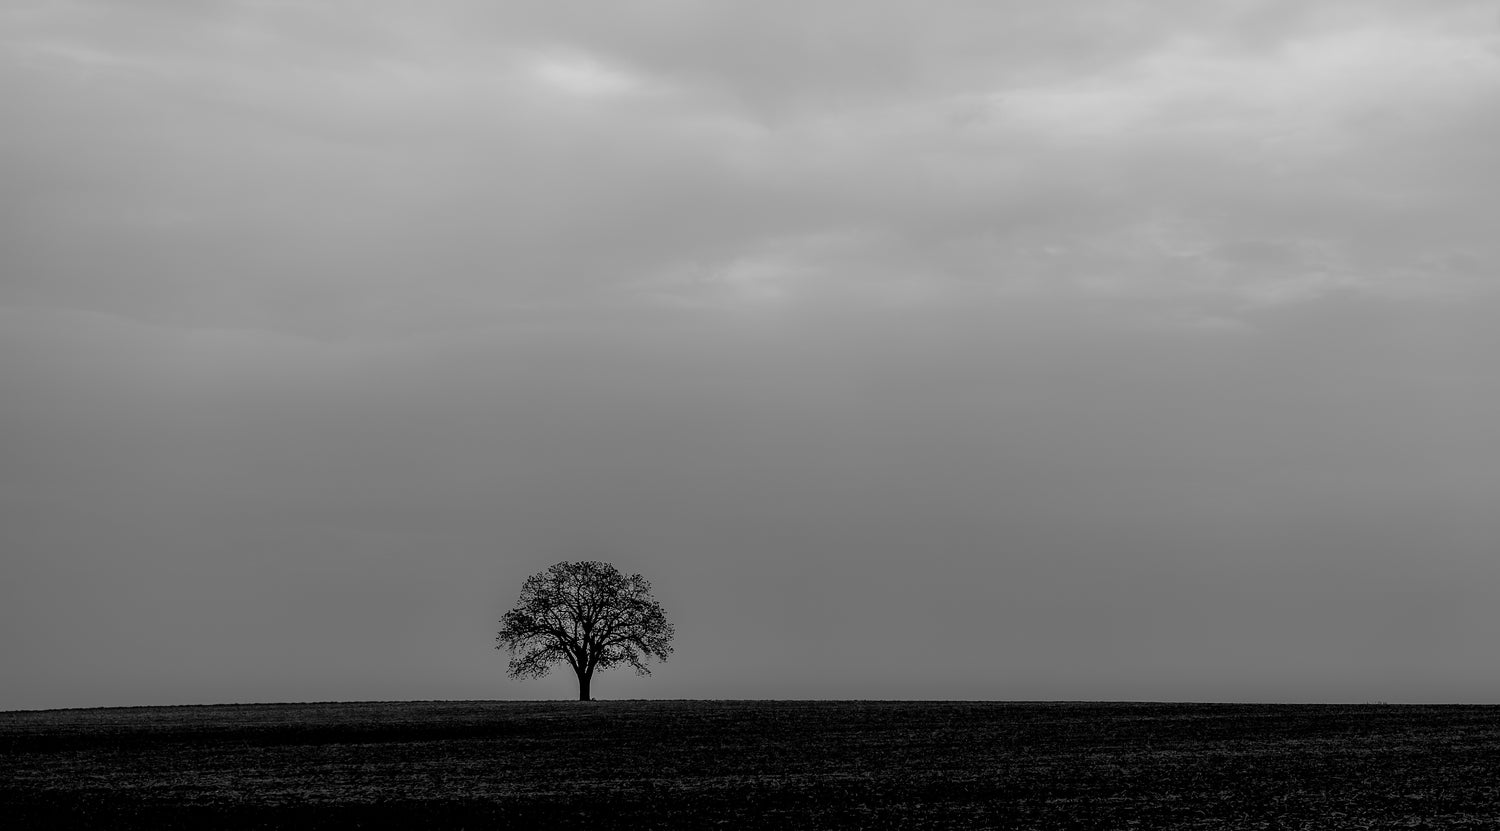 Black, white and grey picture of a tree in an open field